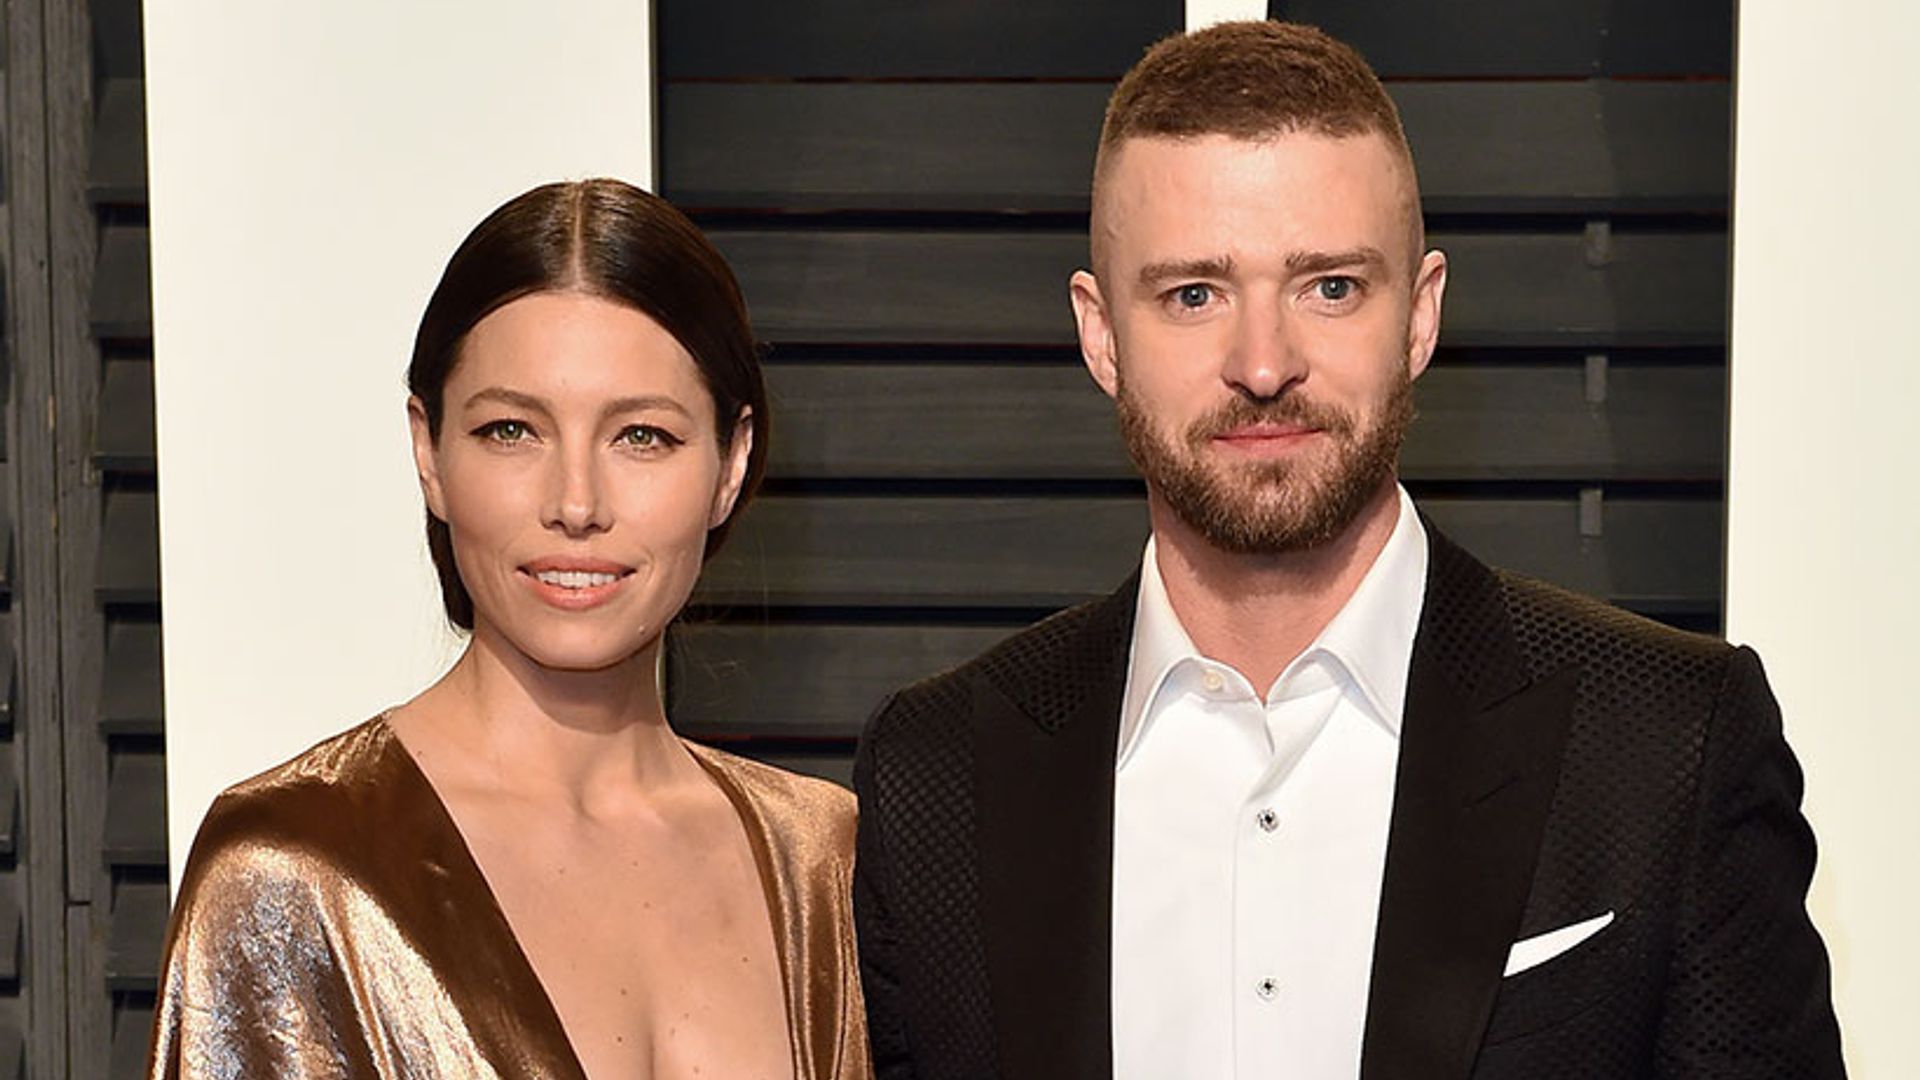 Jessica Biel explains how she and Justin Timberlake have been